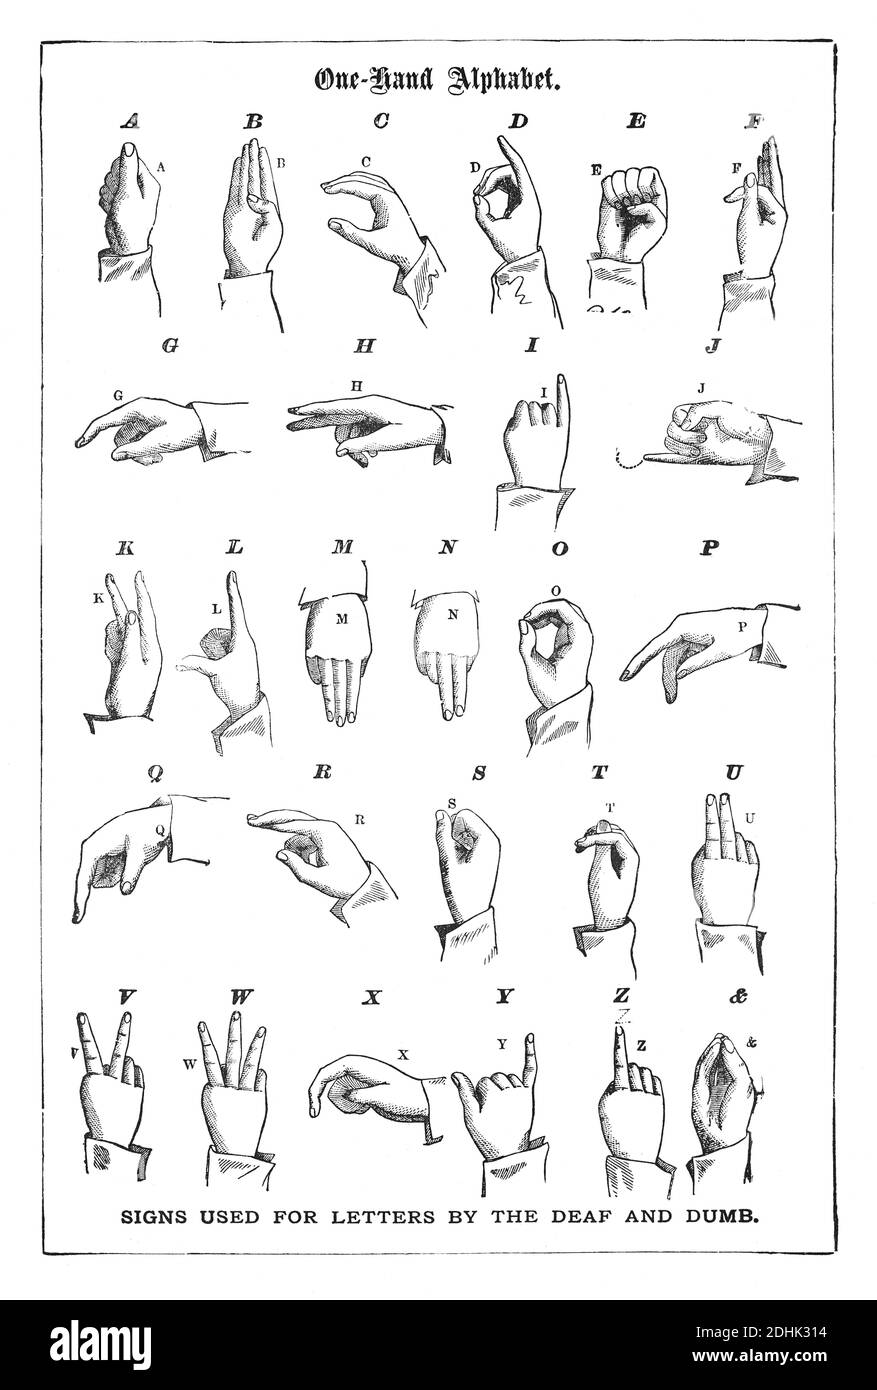 19th century illustration of the one-hand alphabet. Signs used for letters by the deaf and dumb. Published in 'The National Encyclopedia of Business a Stock Photo